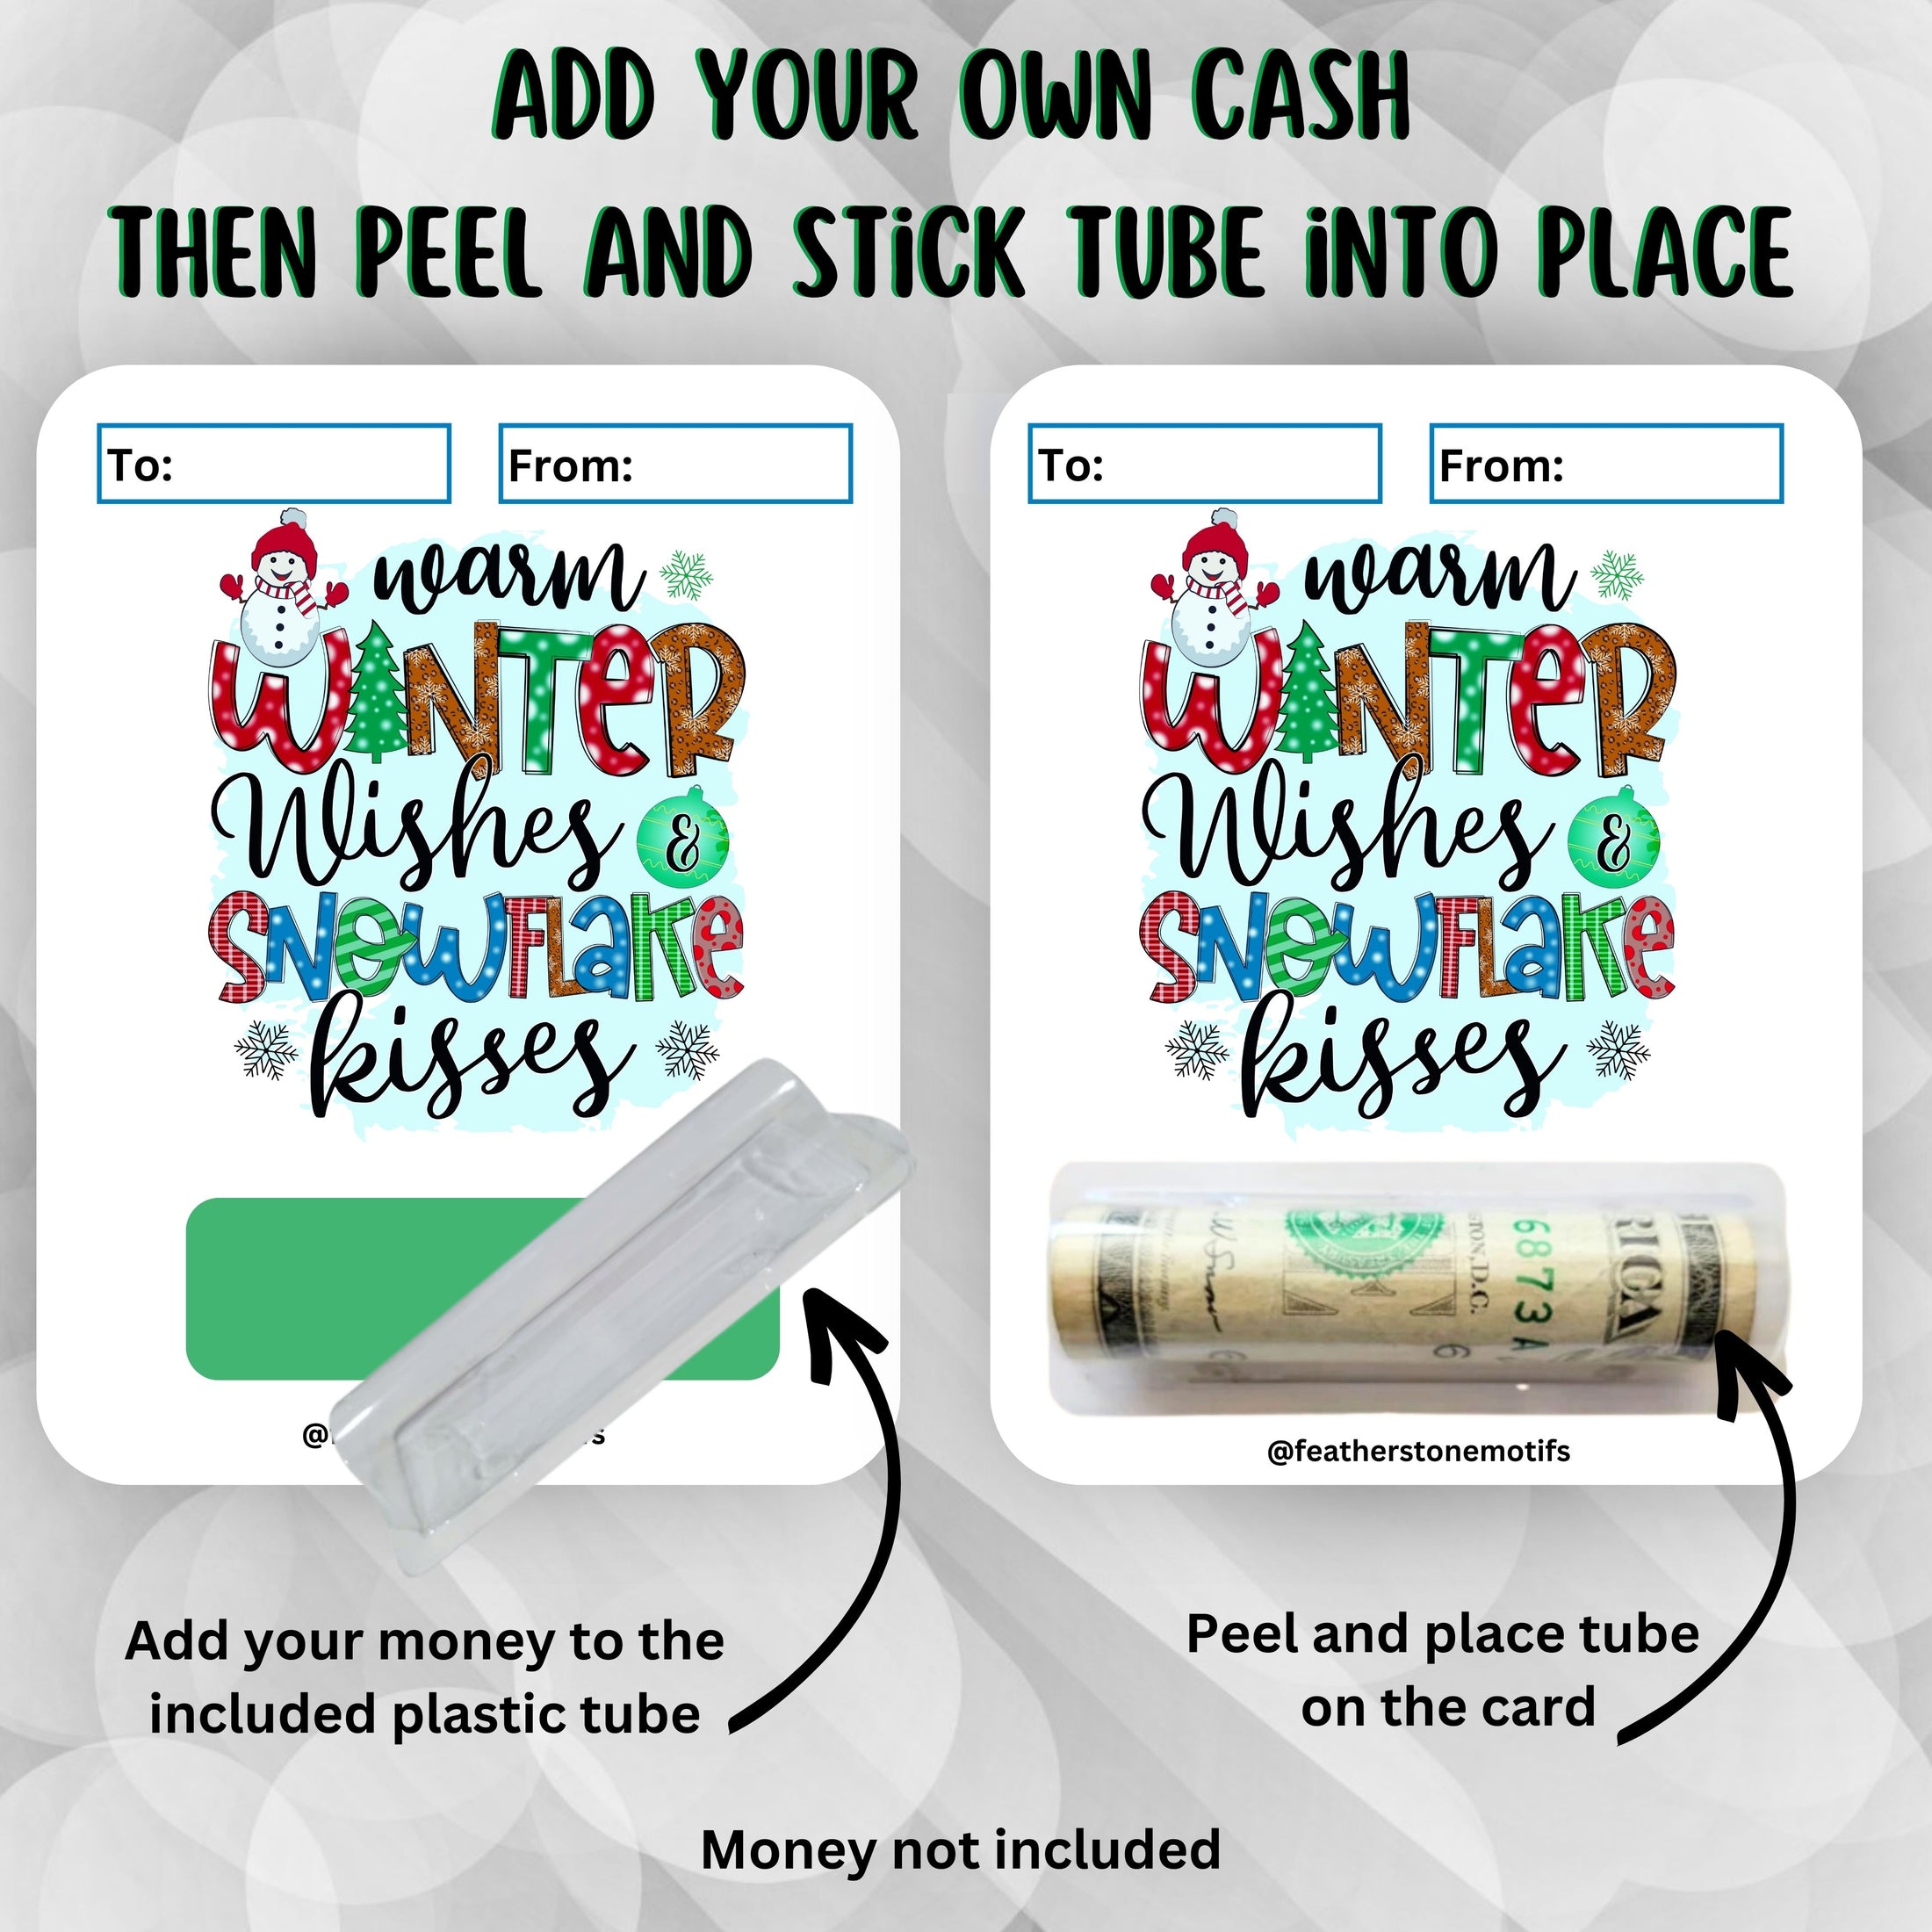 This image shows how to attach the money tube to the Snowflake Kisses Money Card.